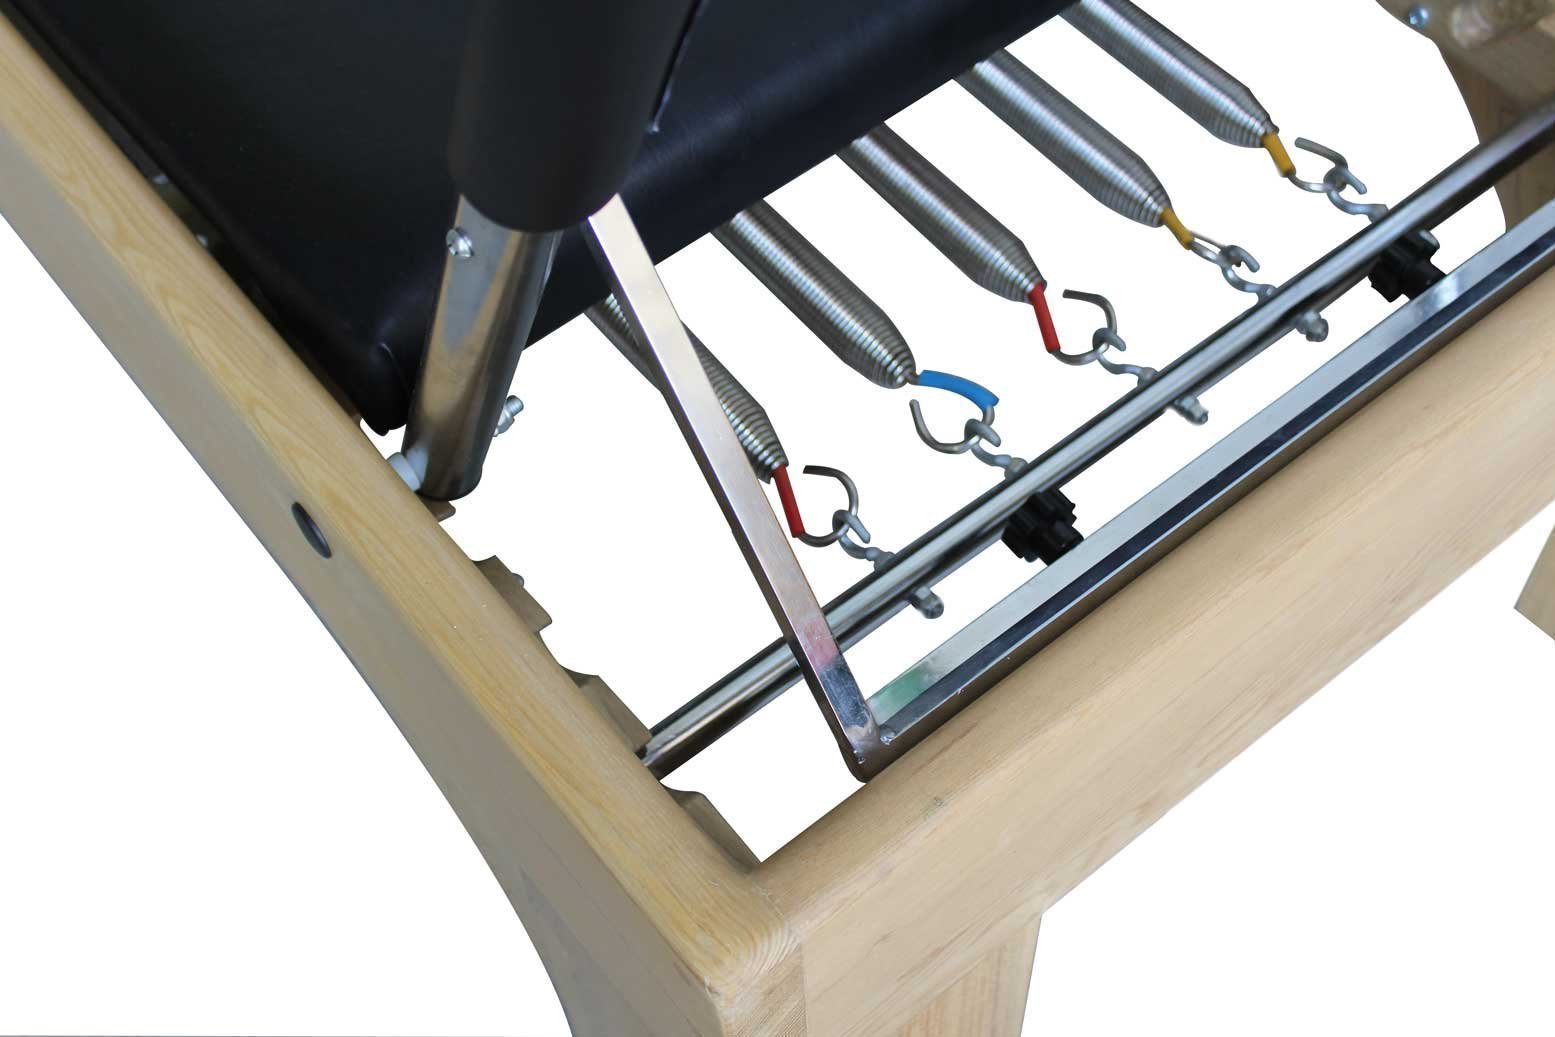 Product Review: PLT-200 Pilates Reformer